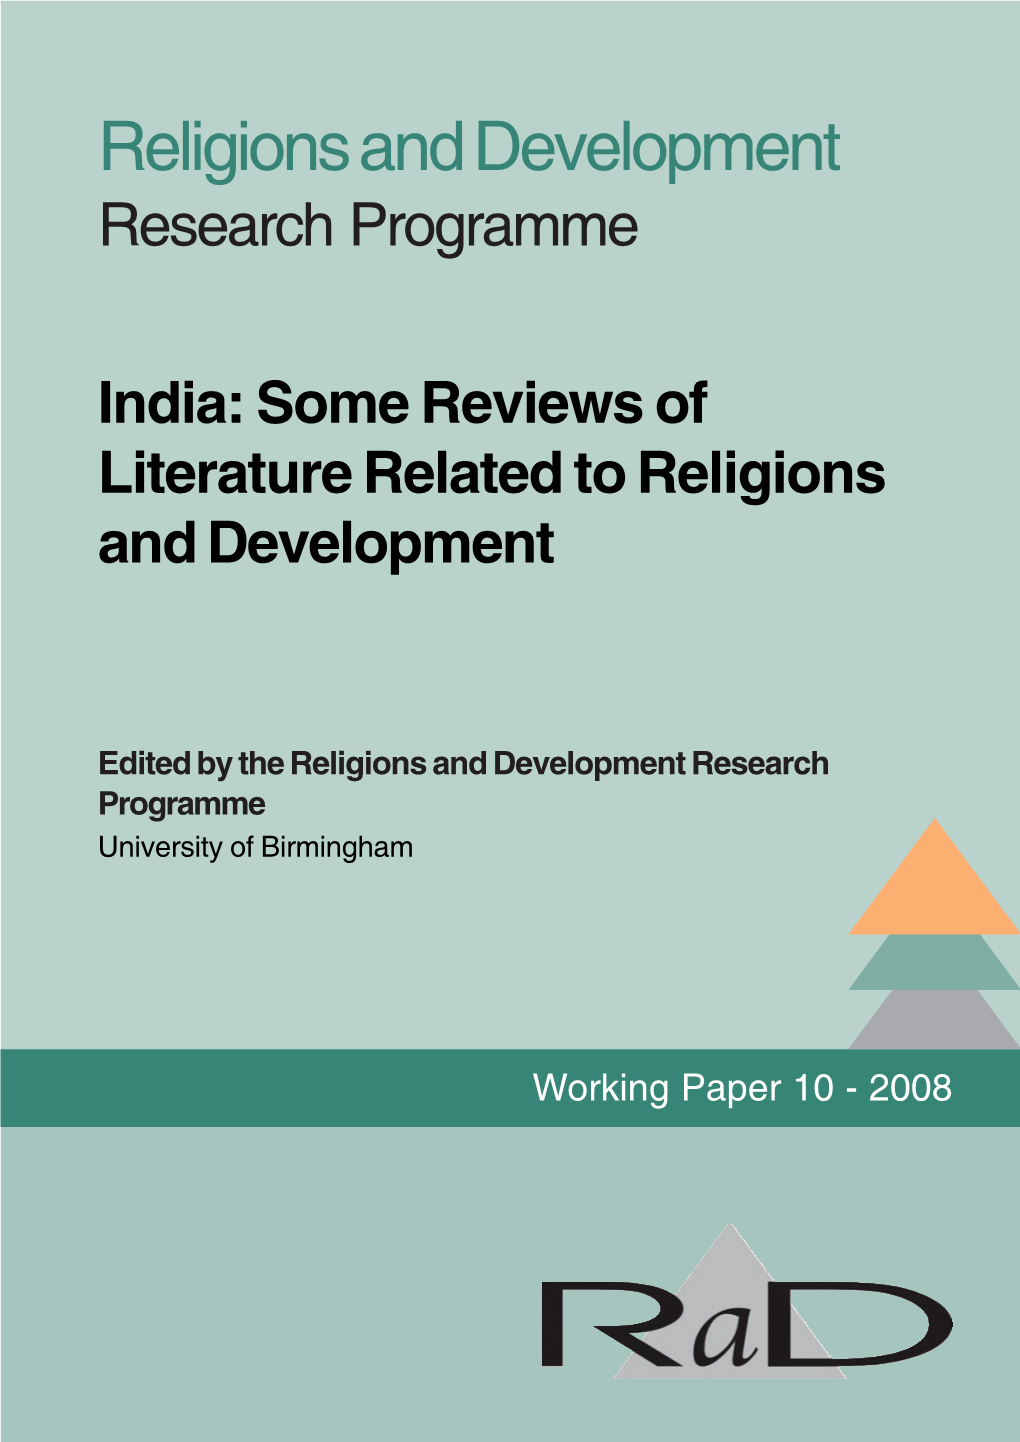 India: Some Reviews of Literature Related to Religions and Development